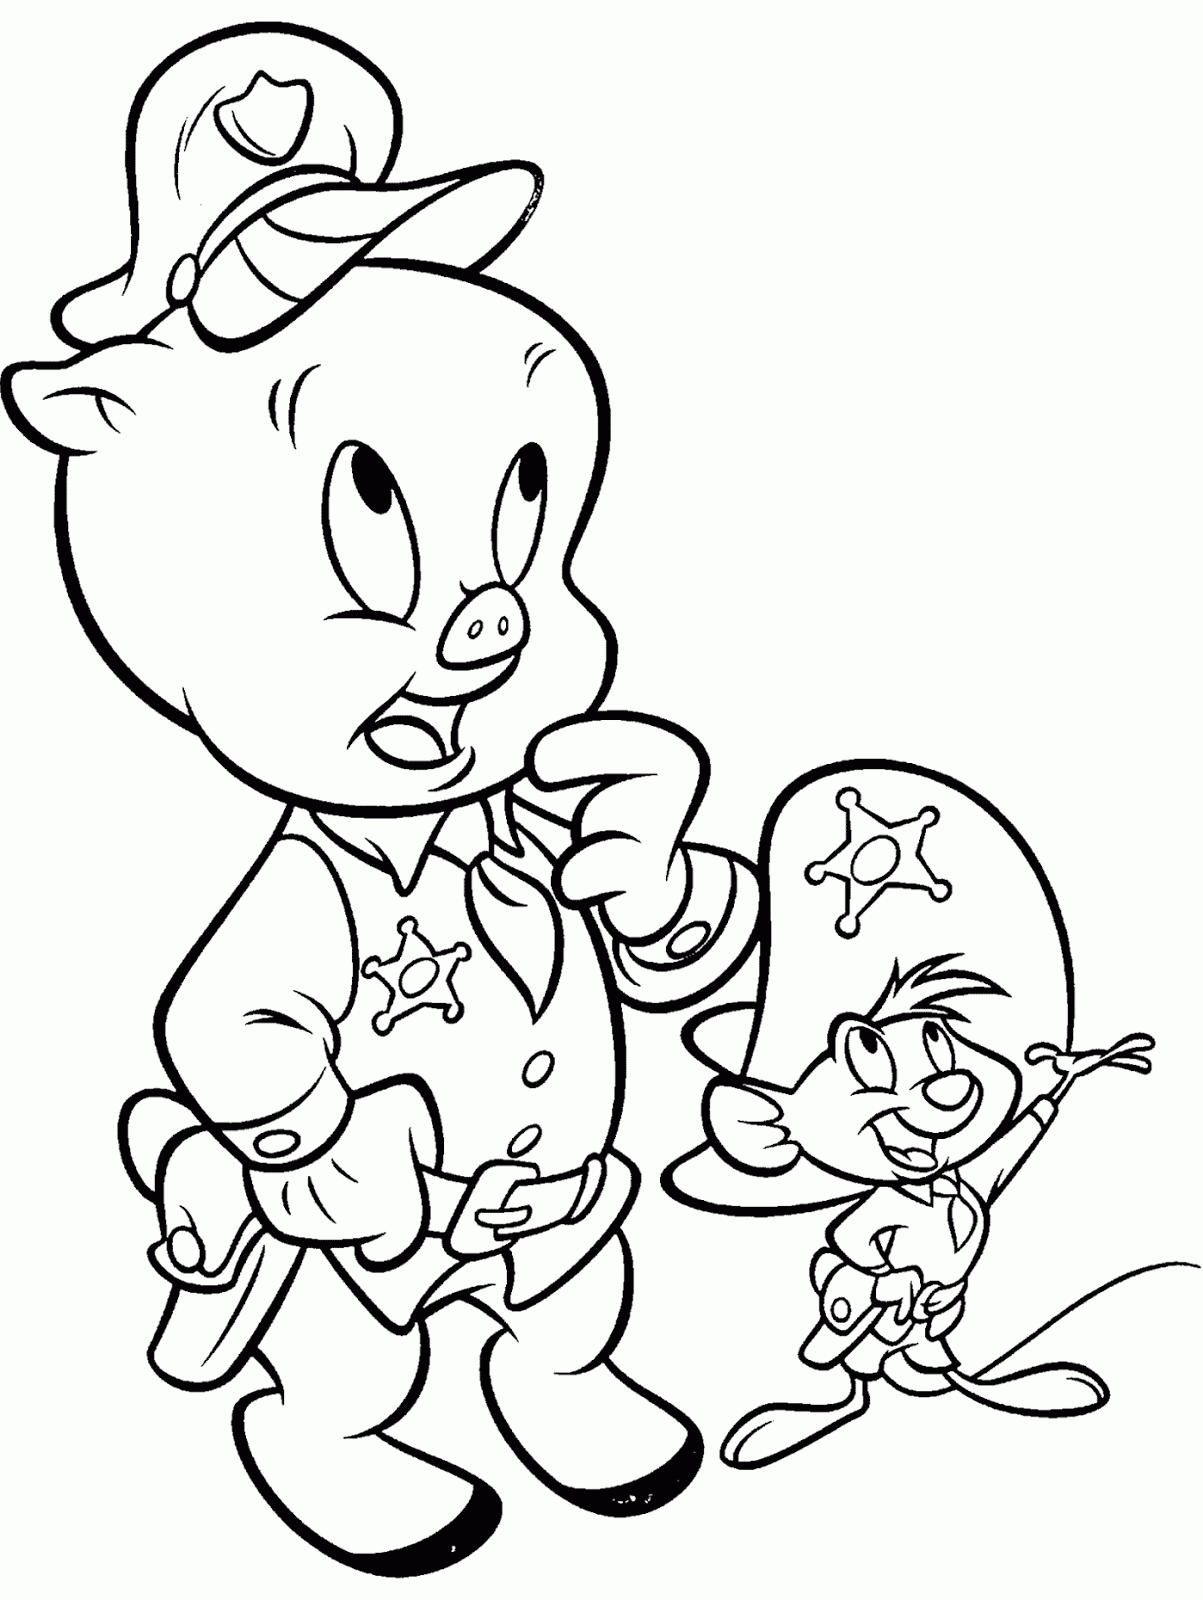 looney tunes coloring pages to print free printable looney tunes coloring pages for kids coloring print to looney pages tunes 